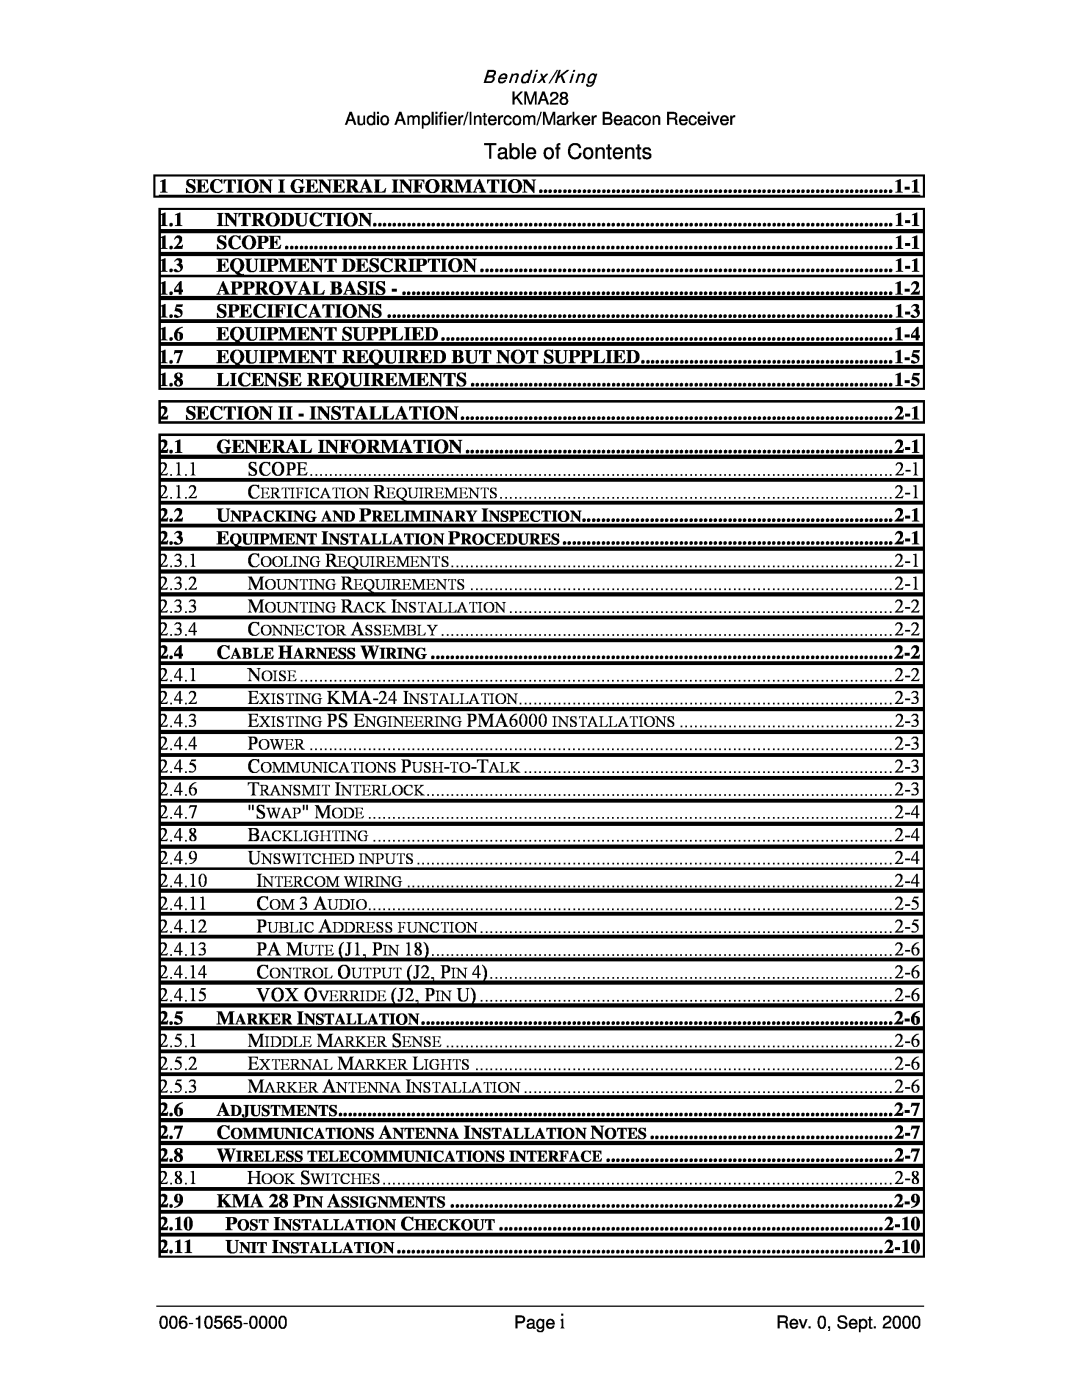 Honeywell KMA28 operation manual Table of Contents 